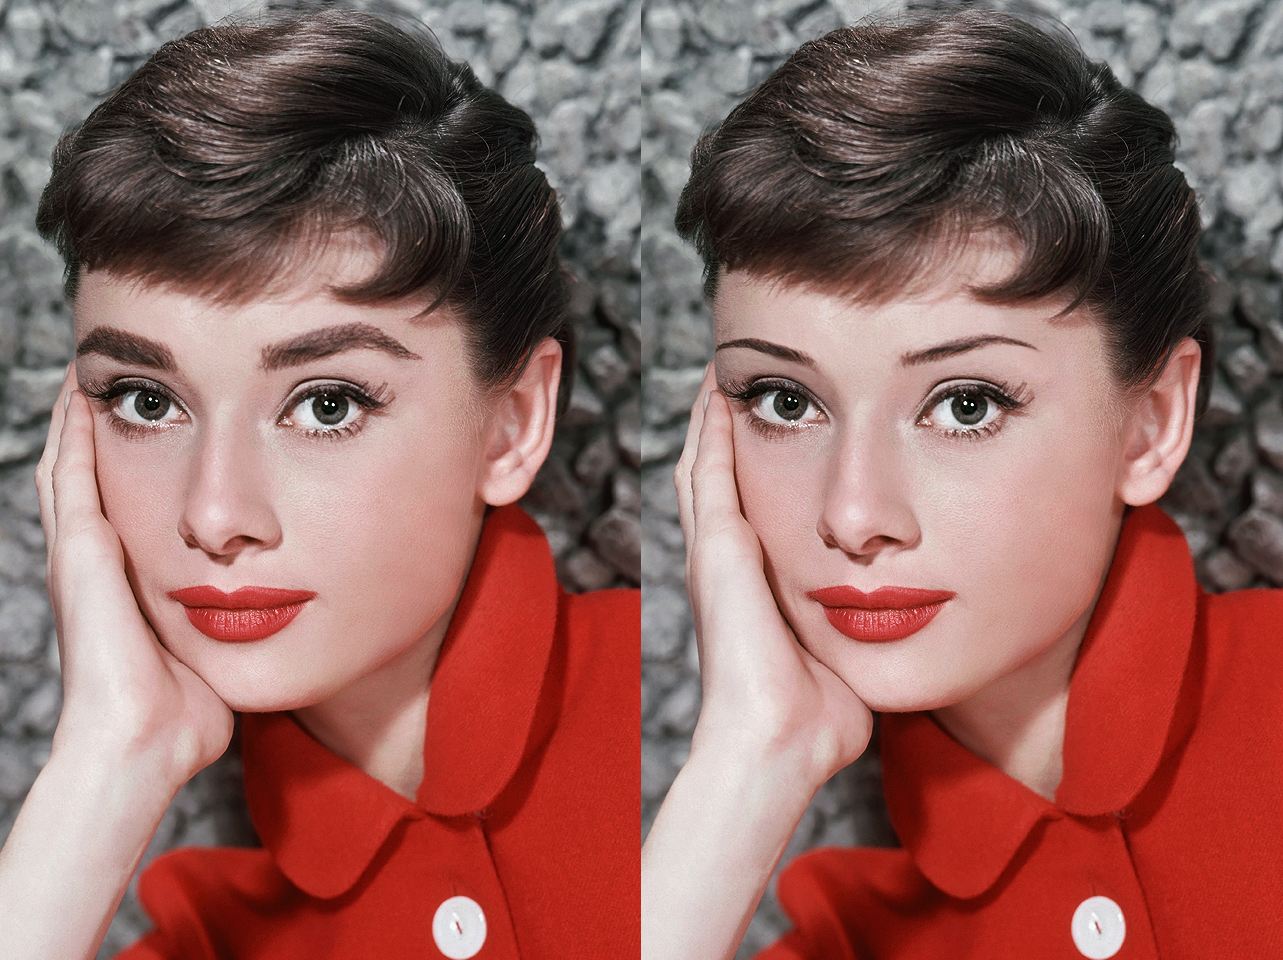 Audrey Hepburn's signature brows from the 1950s vs digitally edited thin-brow look | Source: Getty Images